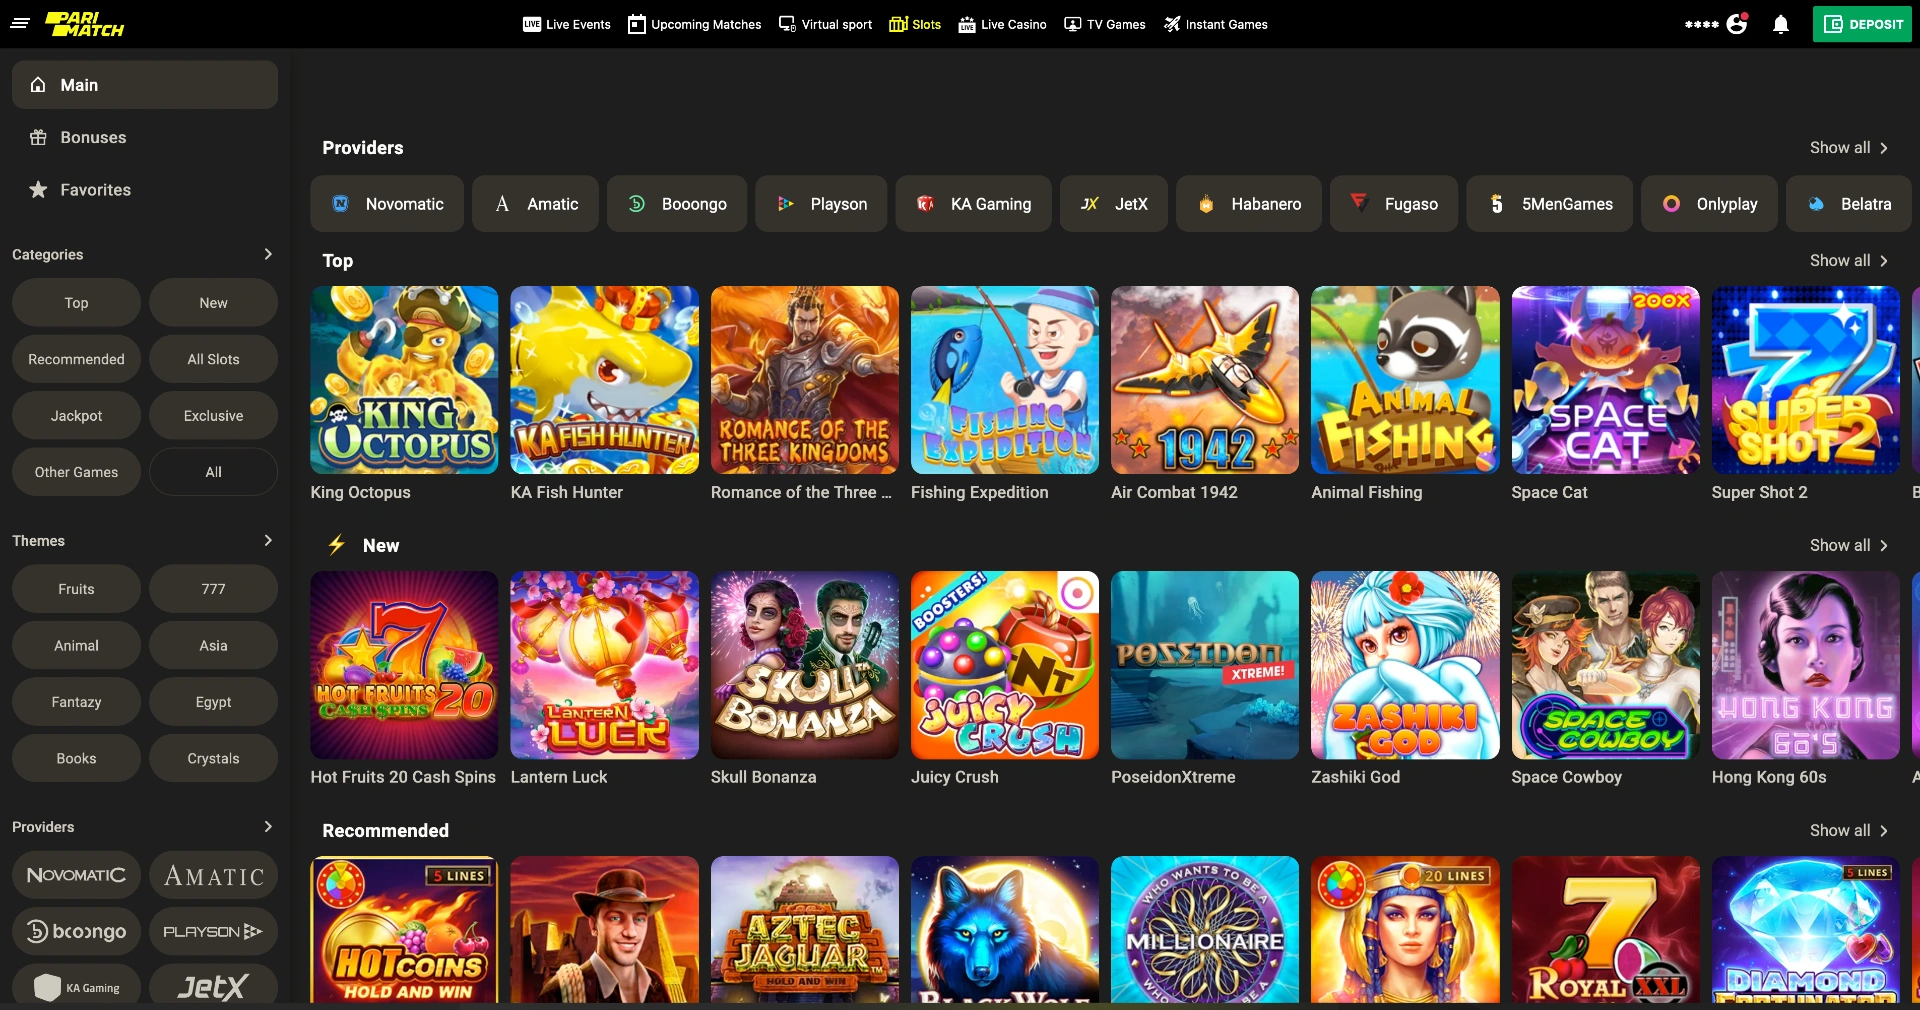 The slots section of Parimatch has a huge number of the most popular and interesting slots